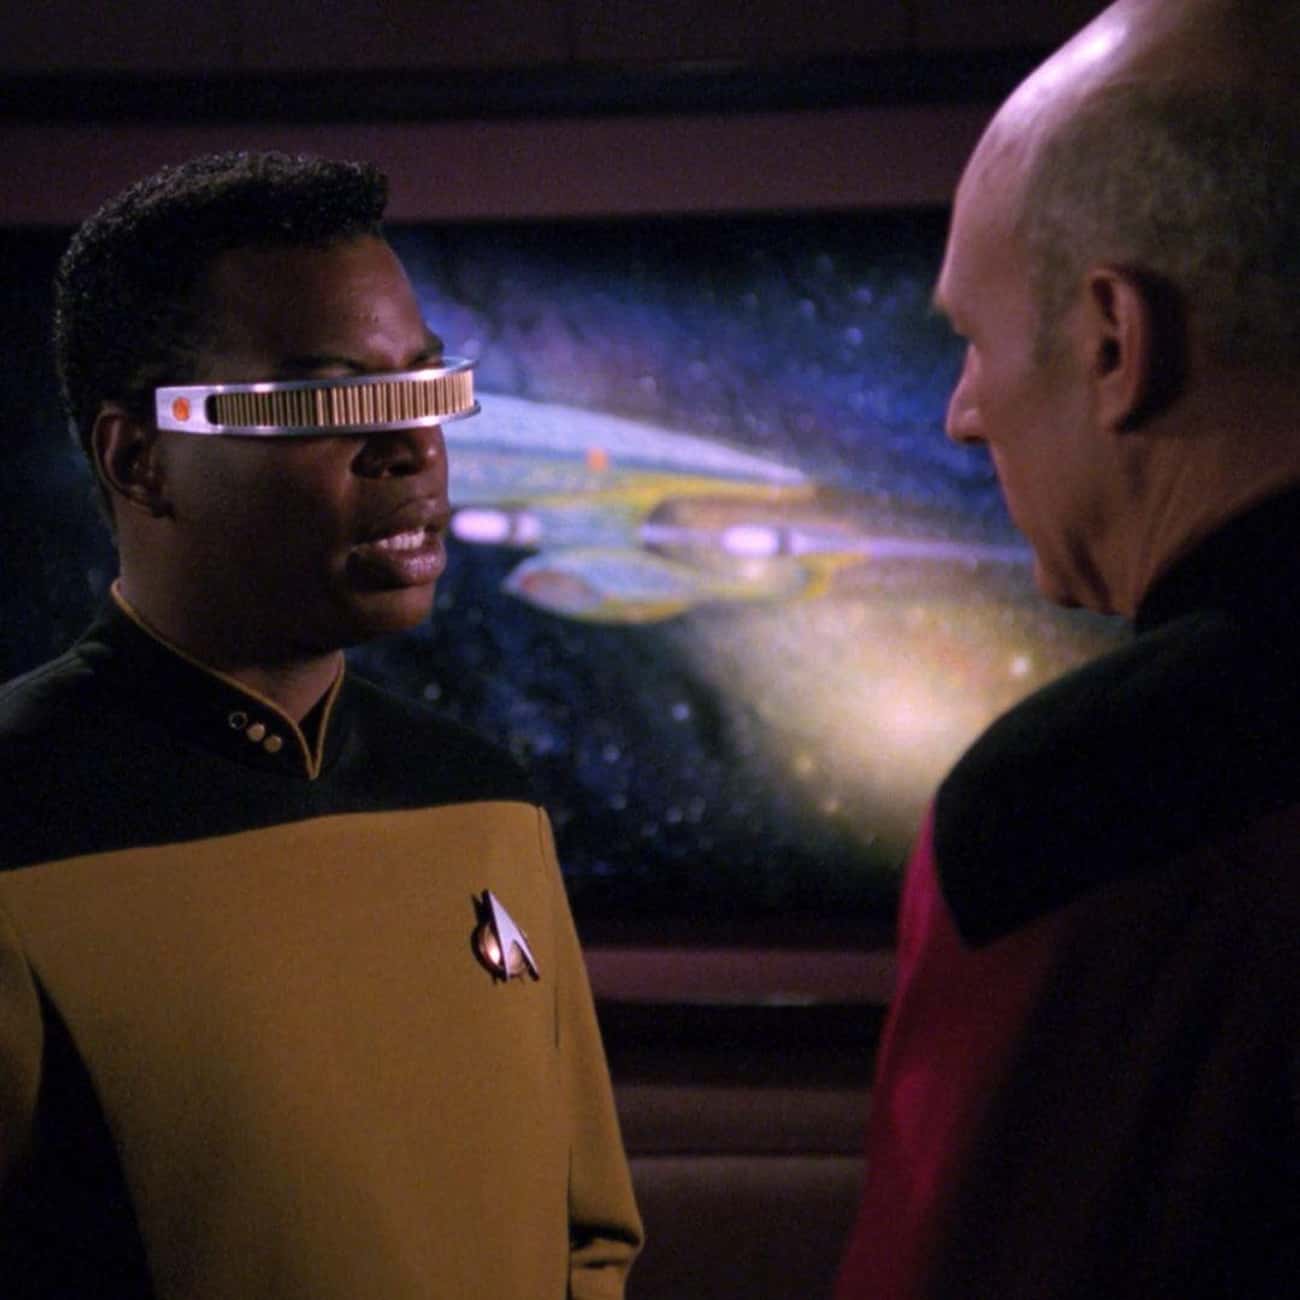 To La Forge In 'Hollow Pursuits'